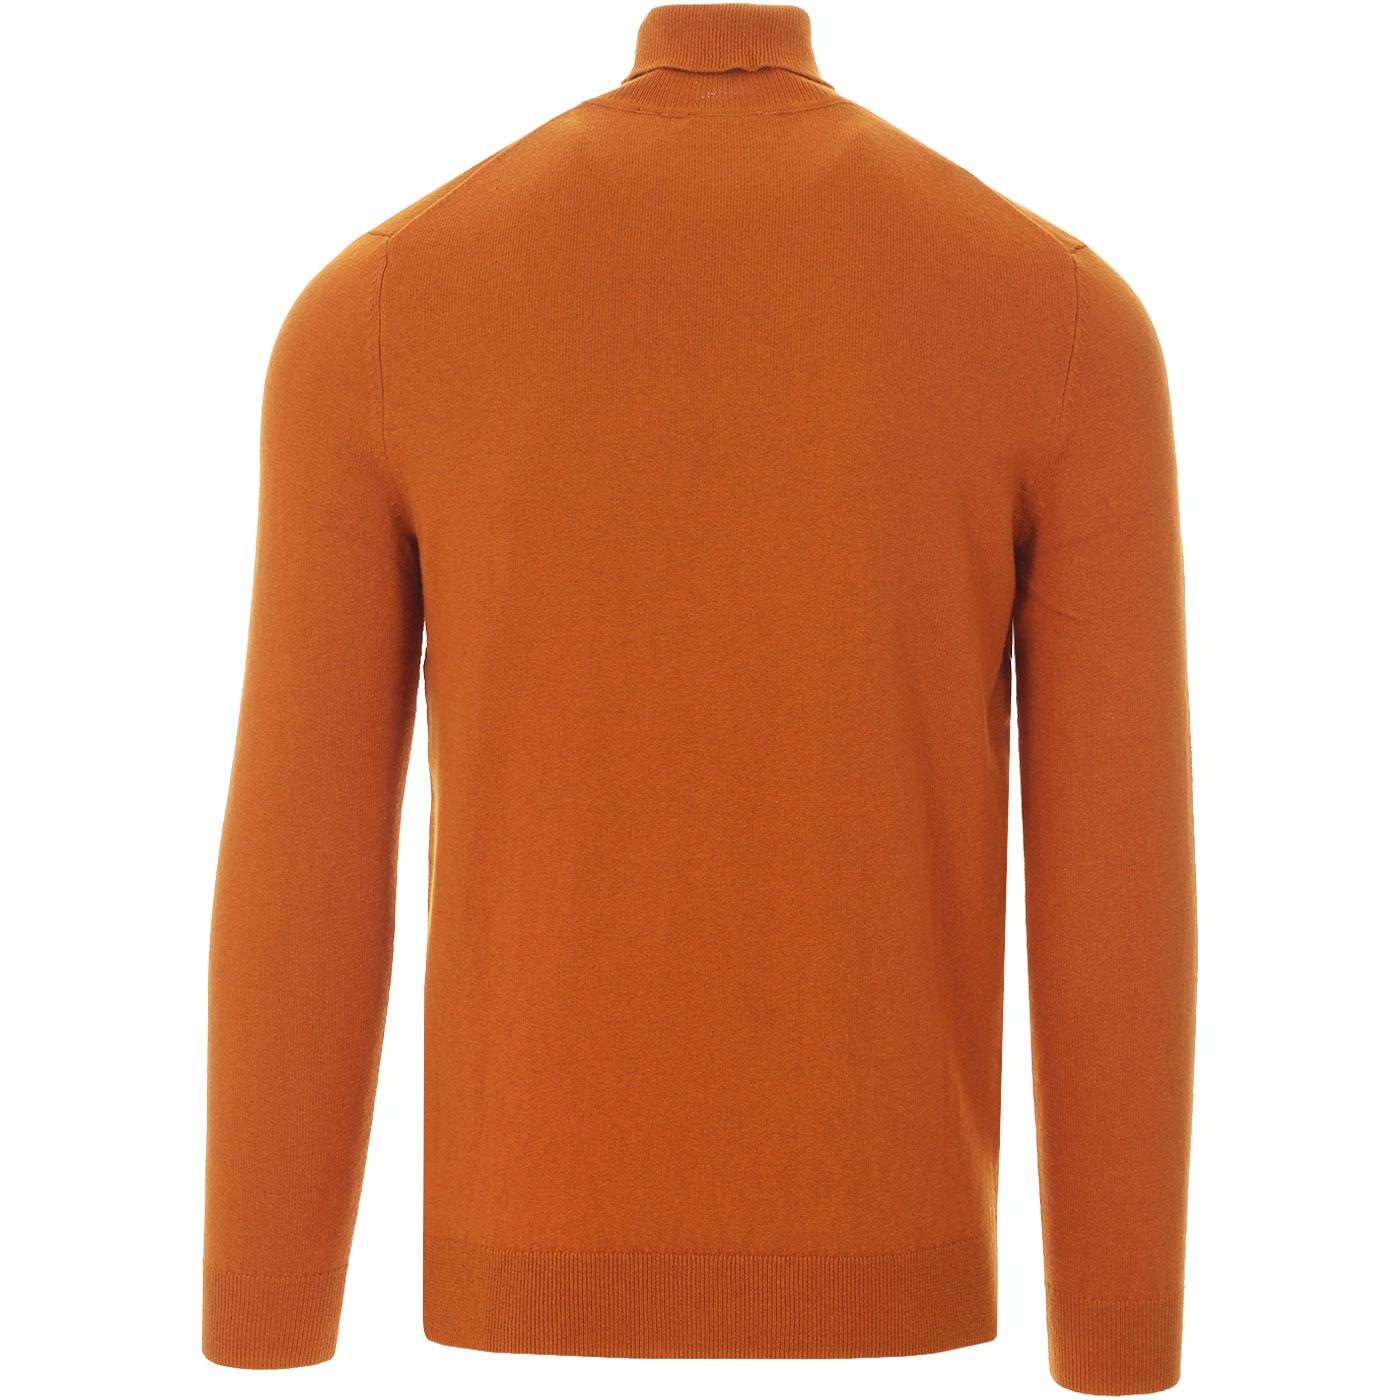 LYLE & SCOTT Retro Knitted Roll Neck Pullover in Cider Brown